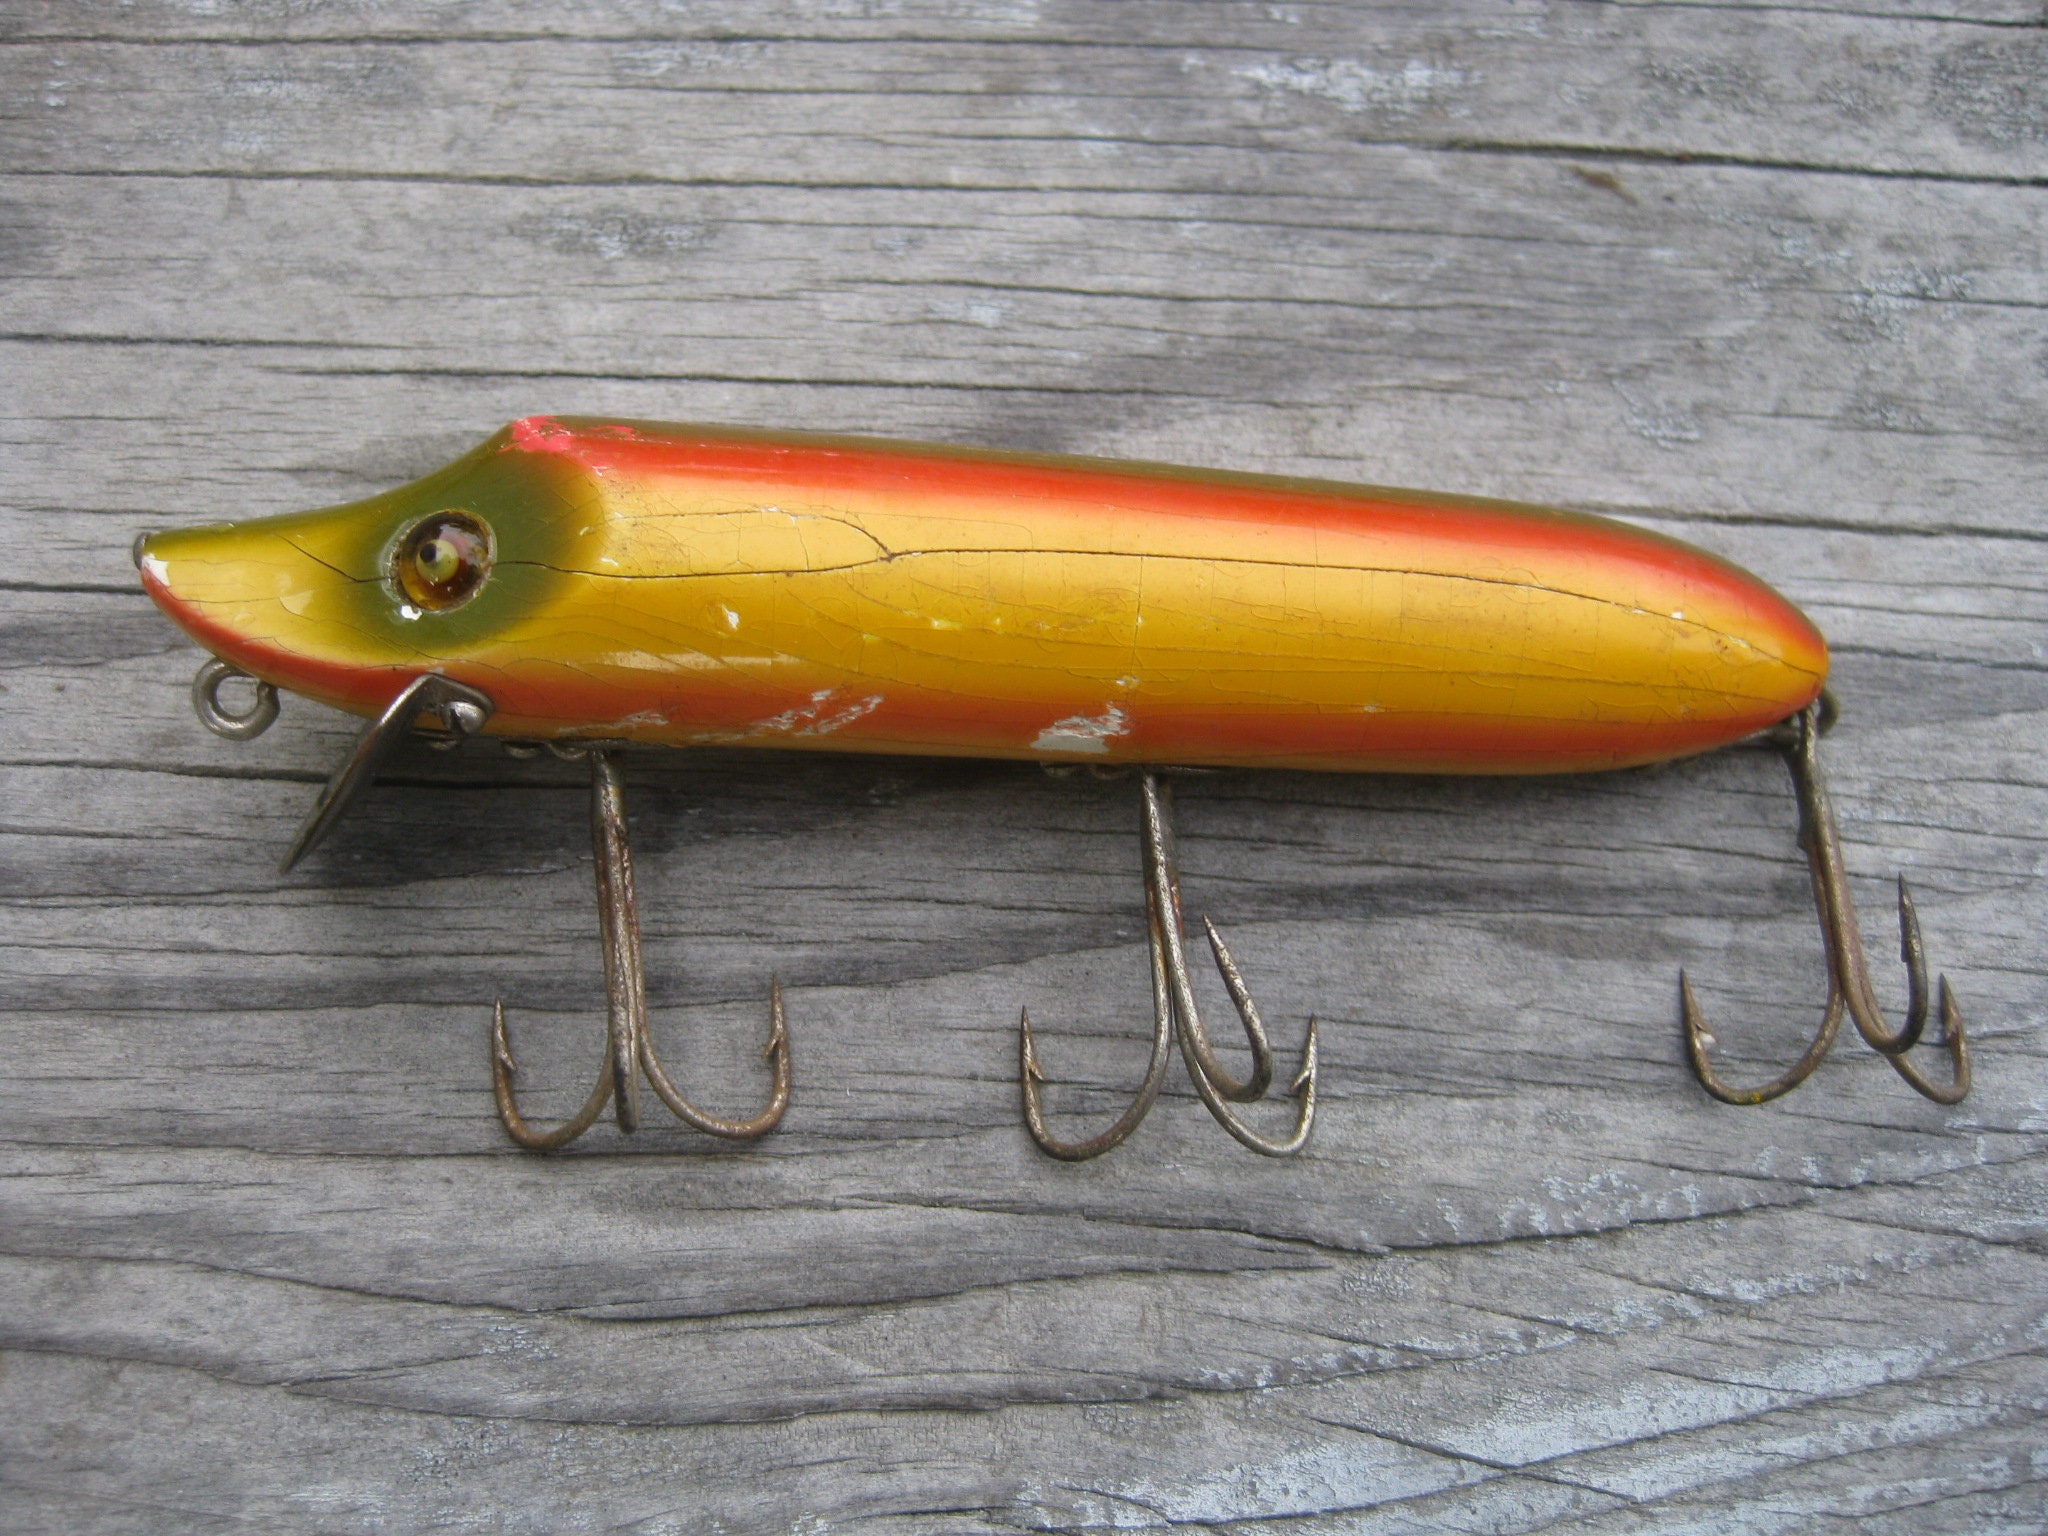 Lot of 8 Vintage Fishing Lures Wood, Plastic, and Rubber Baits for Tackle  Box Heddon Cobra Bright Eyes Millsite Rattle Bug Mouse and More 